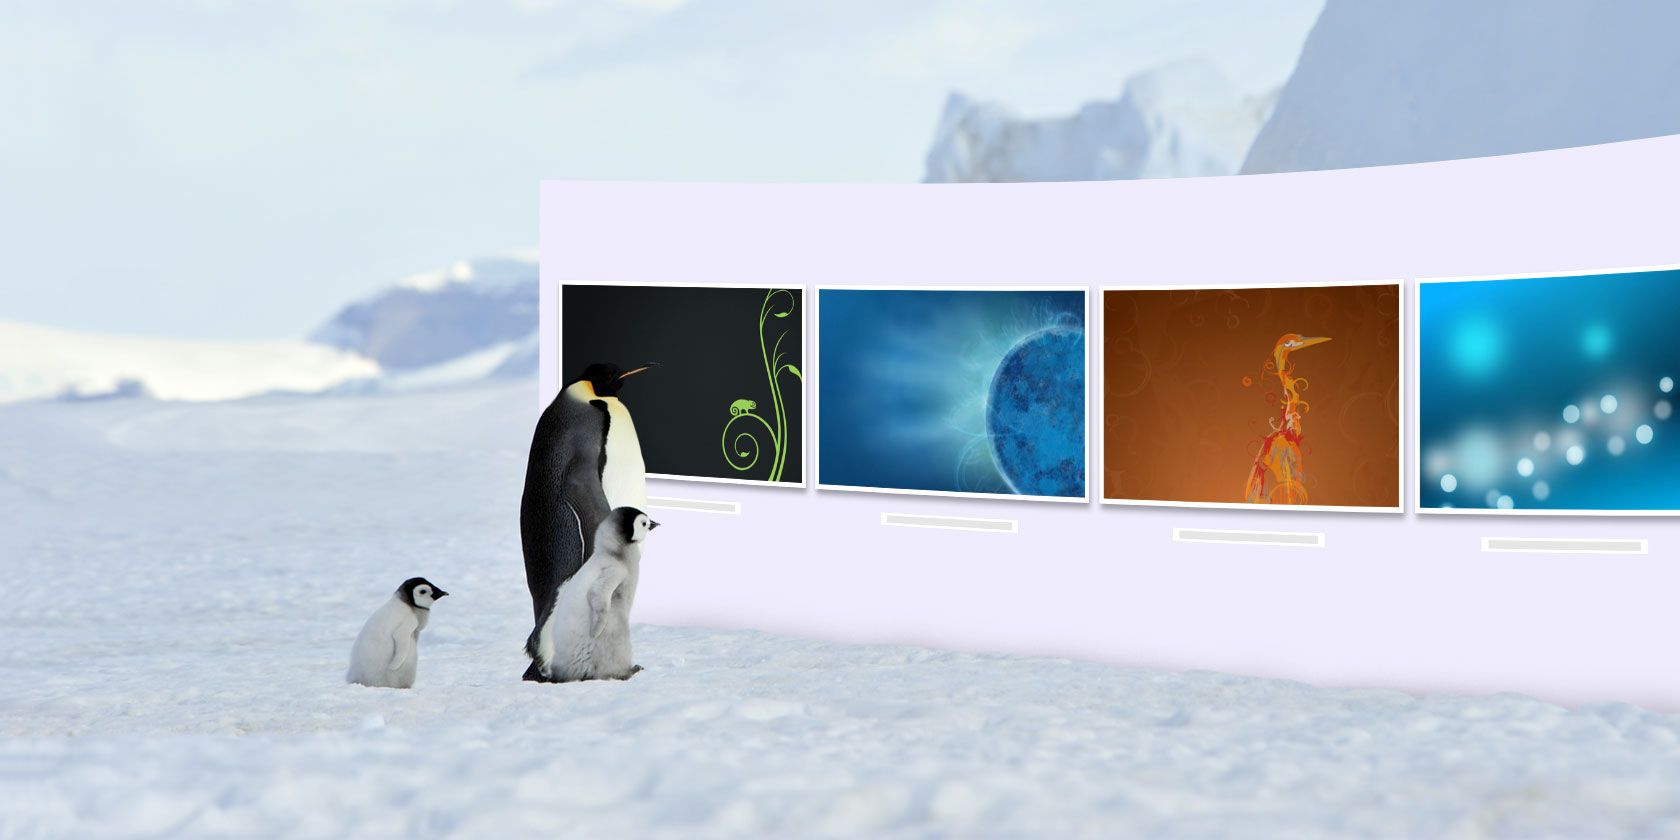 Where to Find Your Favorite Classic Linux Wallpapers